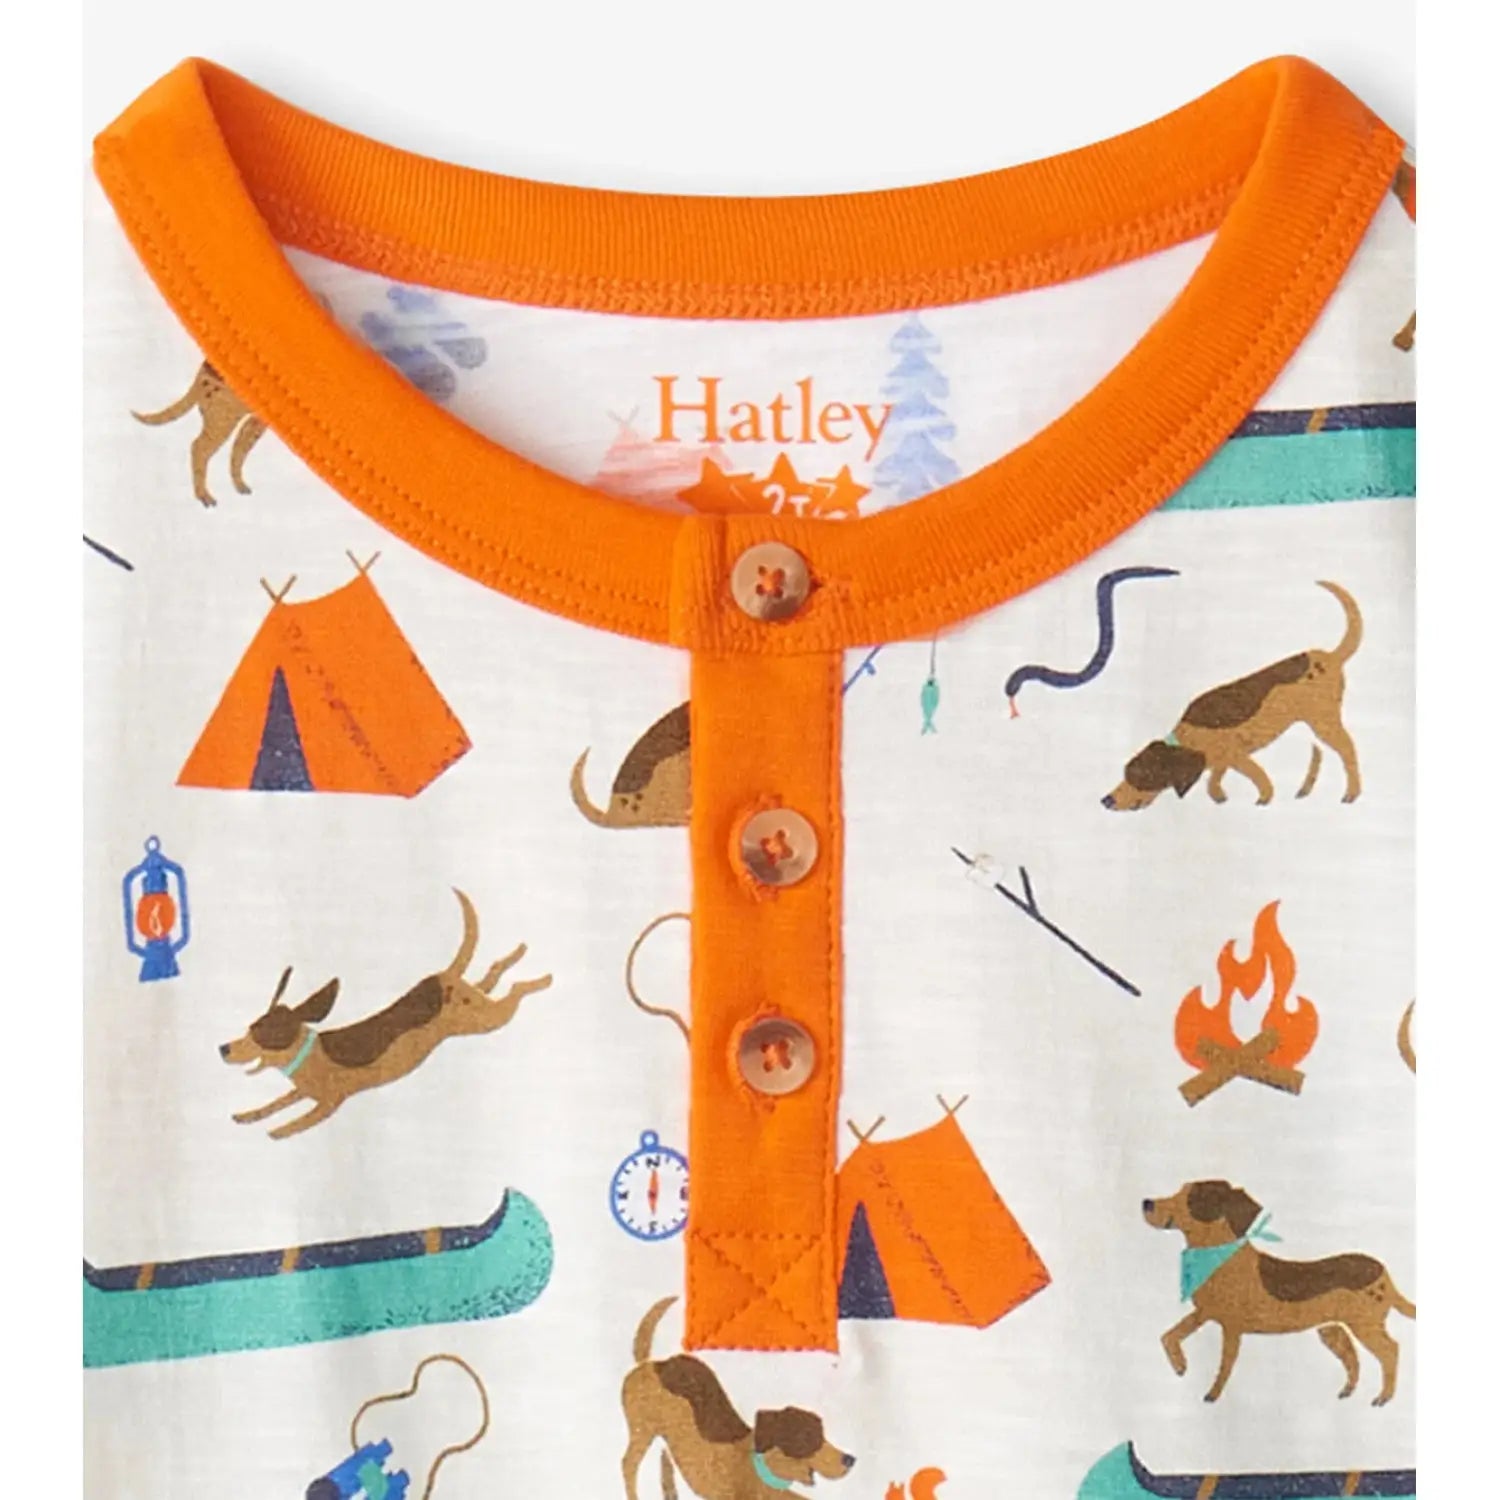 Hatley Baby Camping Dogs Henley. Button detail view.